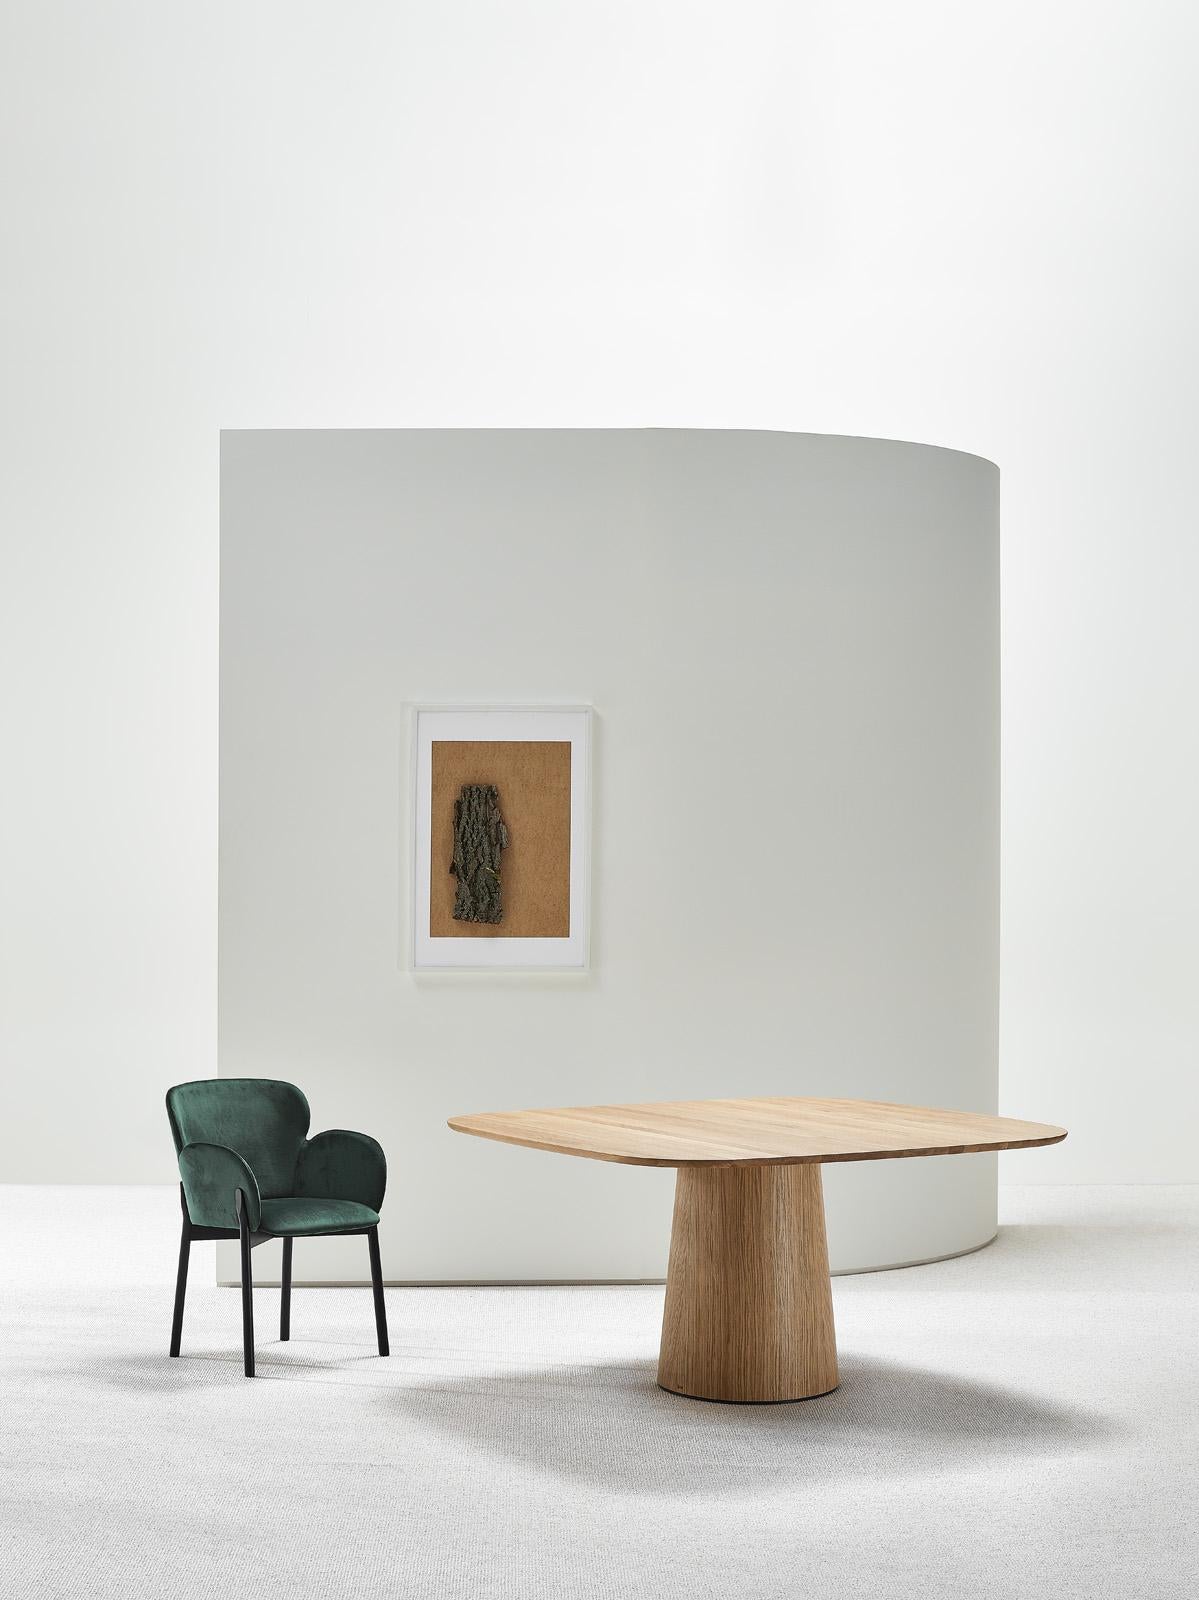 Dining table POV 462 signed by TON & Kashkash studio

Top shape:
Round, square, or rounded square

Top size:
120cm, 130cm,140cm, or 150cm

Wood types:
Solid oak or American walnut

--
The P.O.V. collection features a modular design and